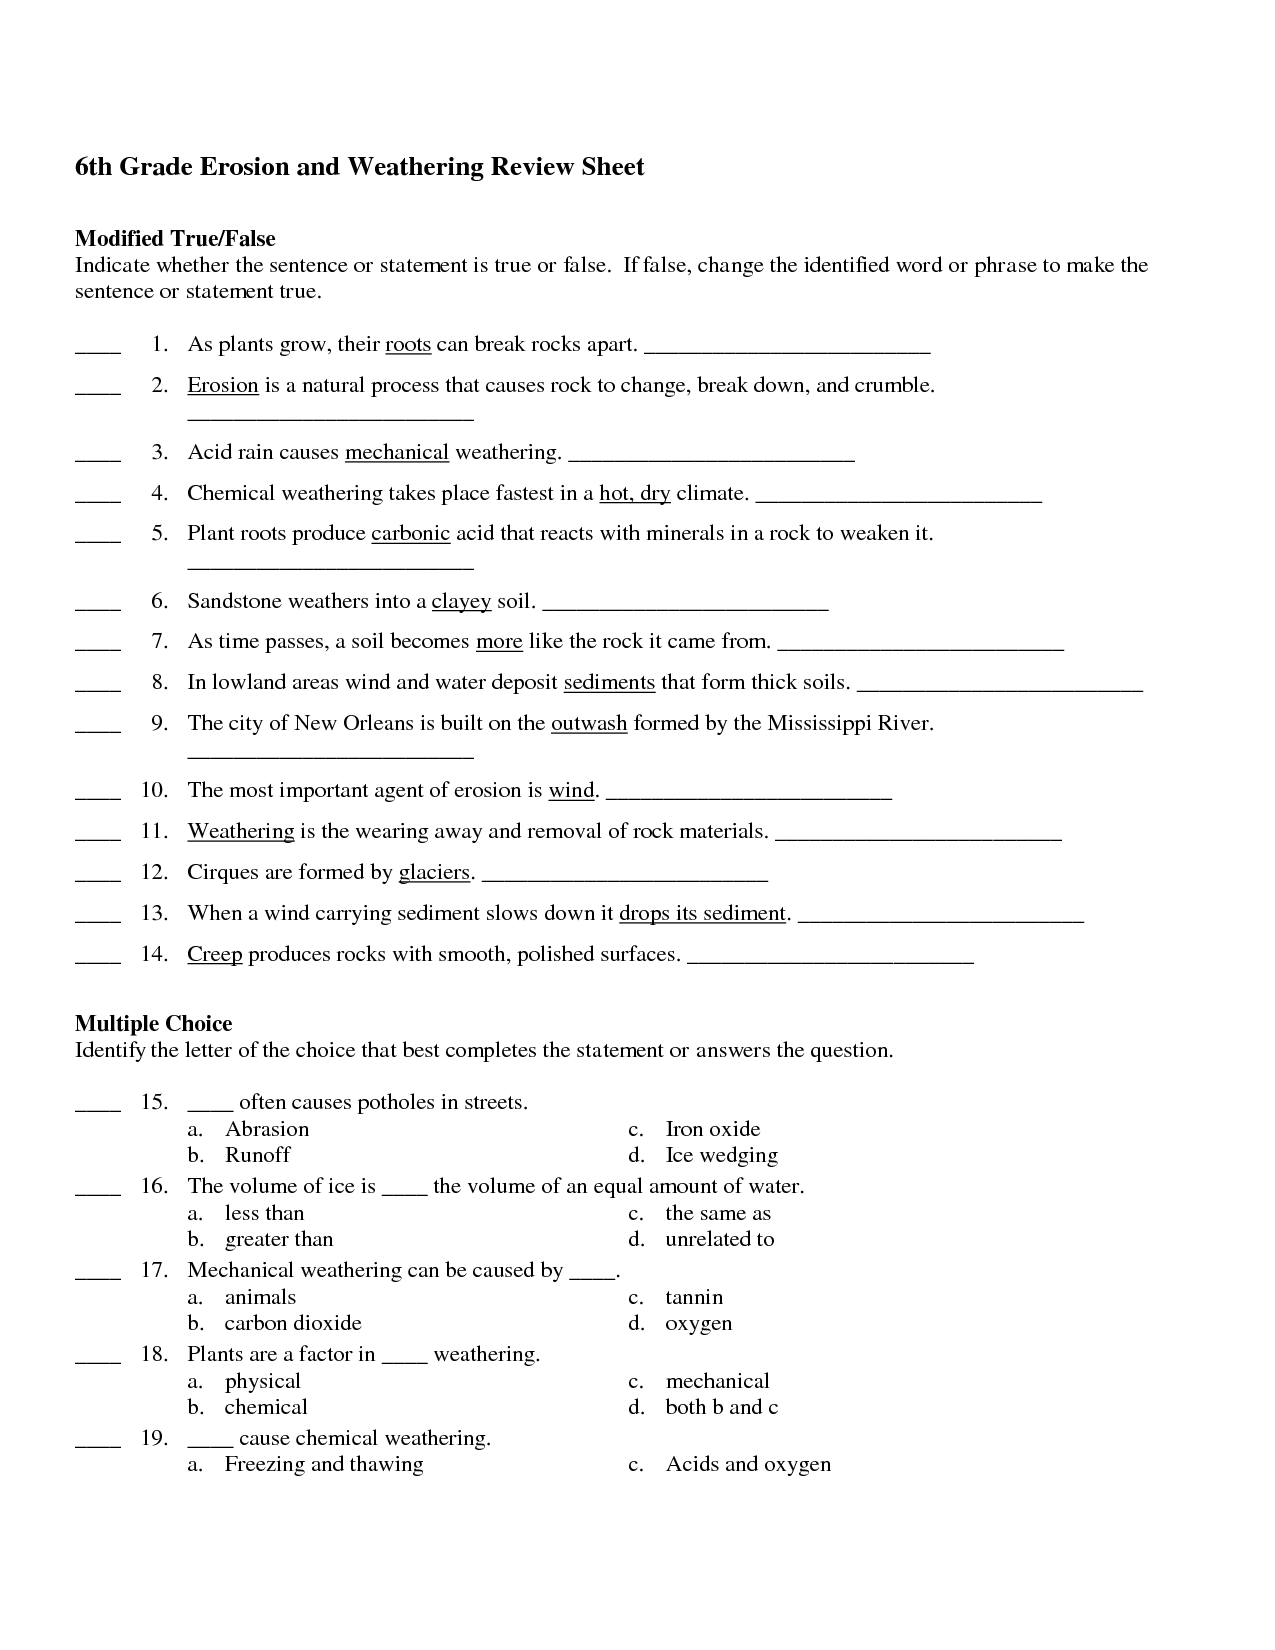 Weathering and Erosion Worksheets 4th Grade Image